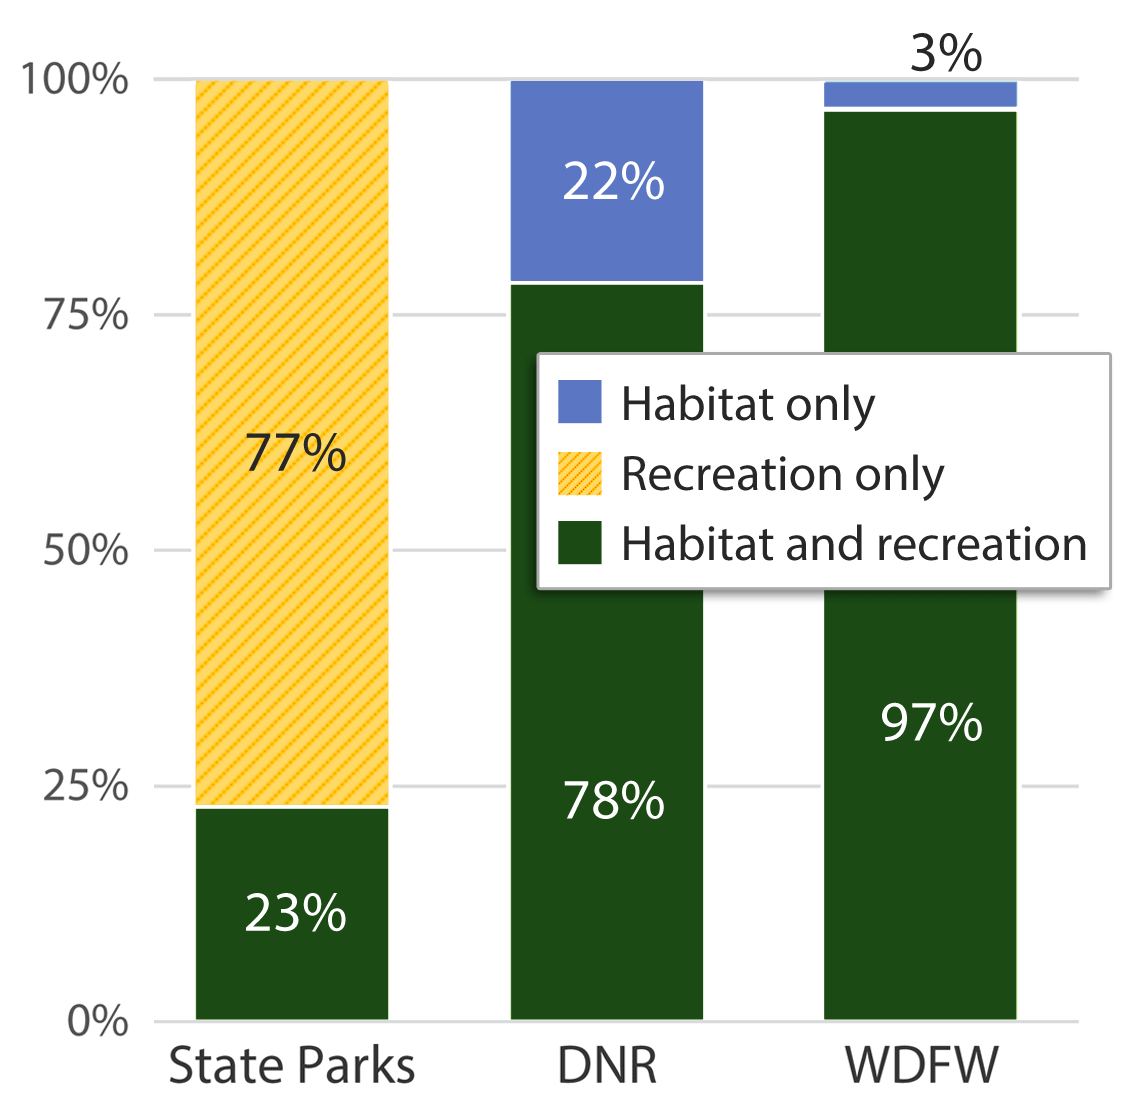 Purposes of lands acquired by State Parks, DNR, and WDFW. 